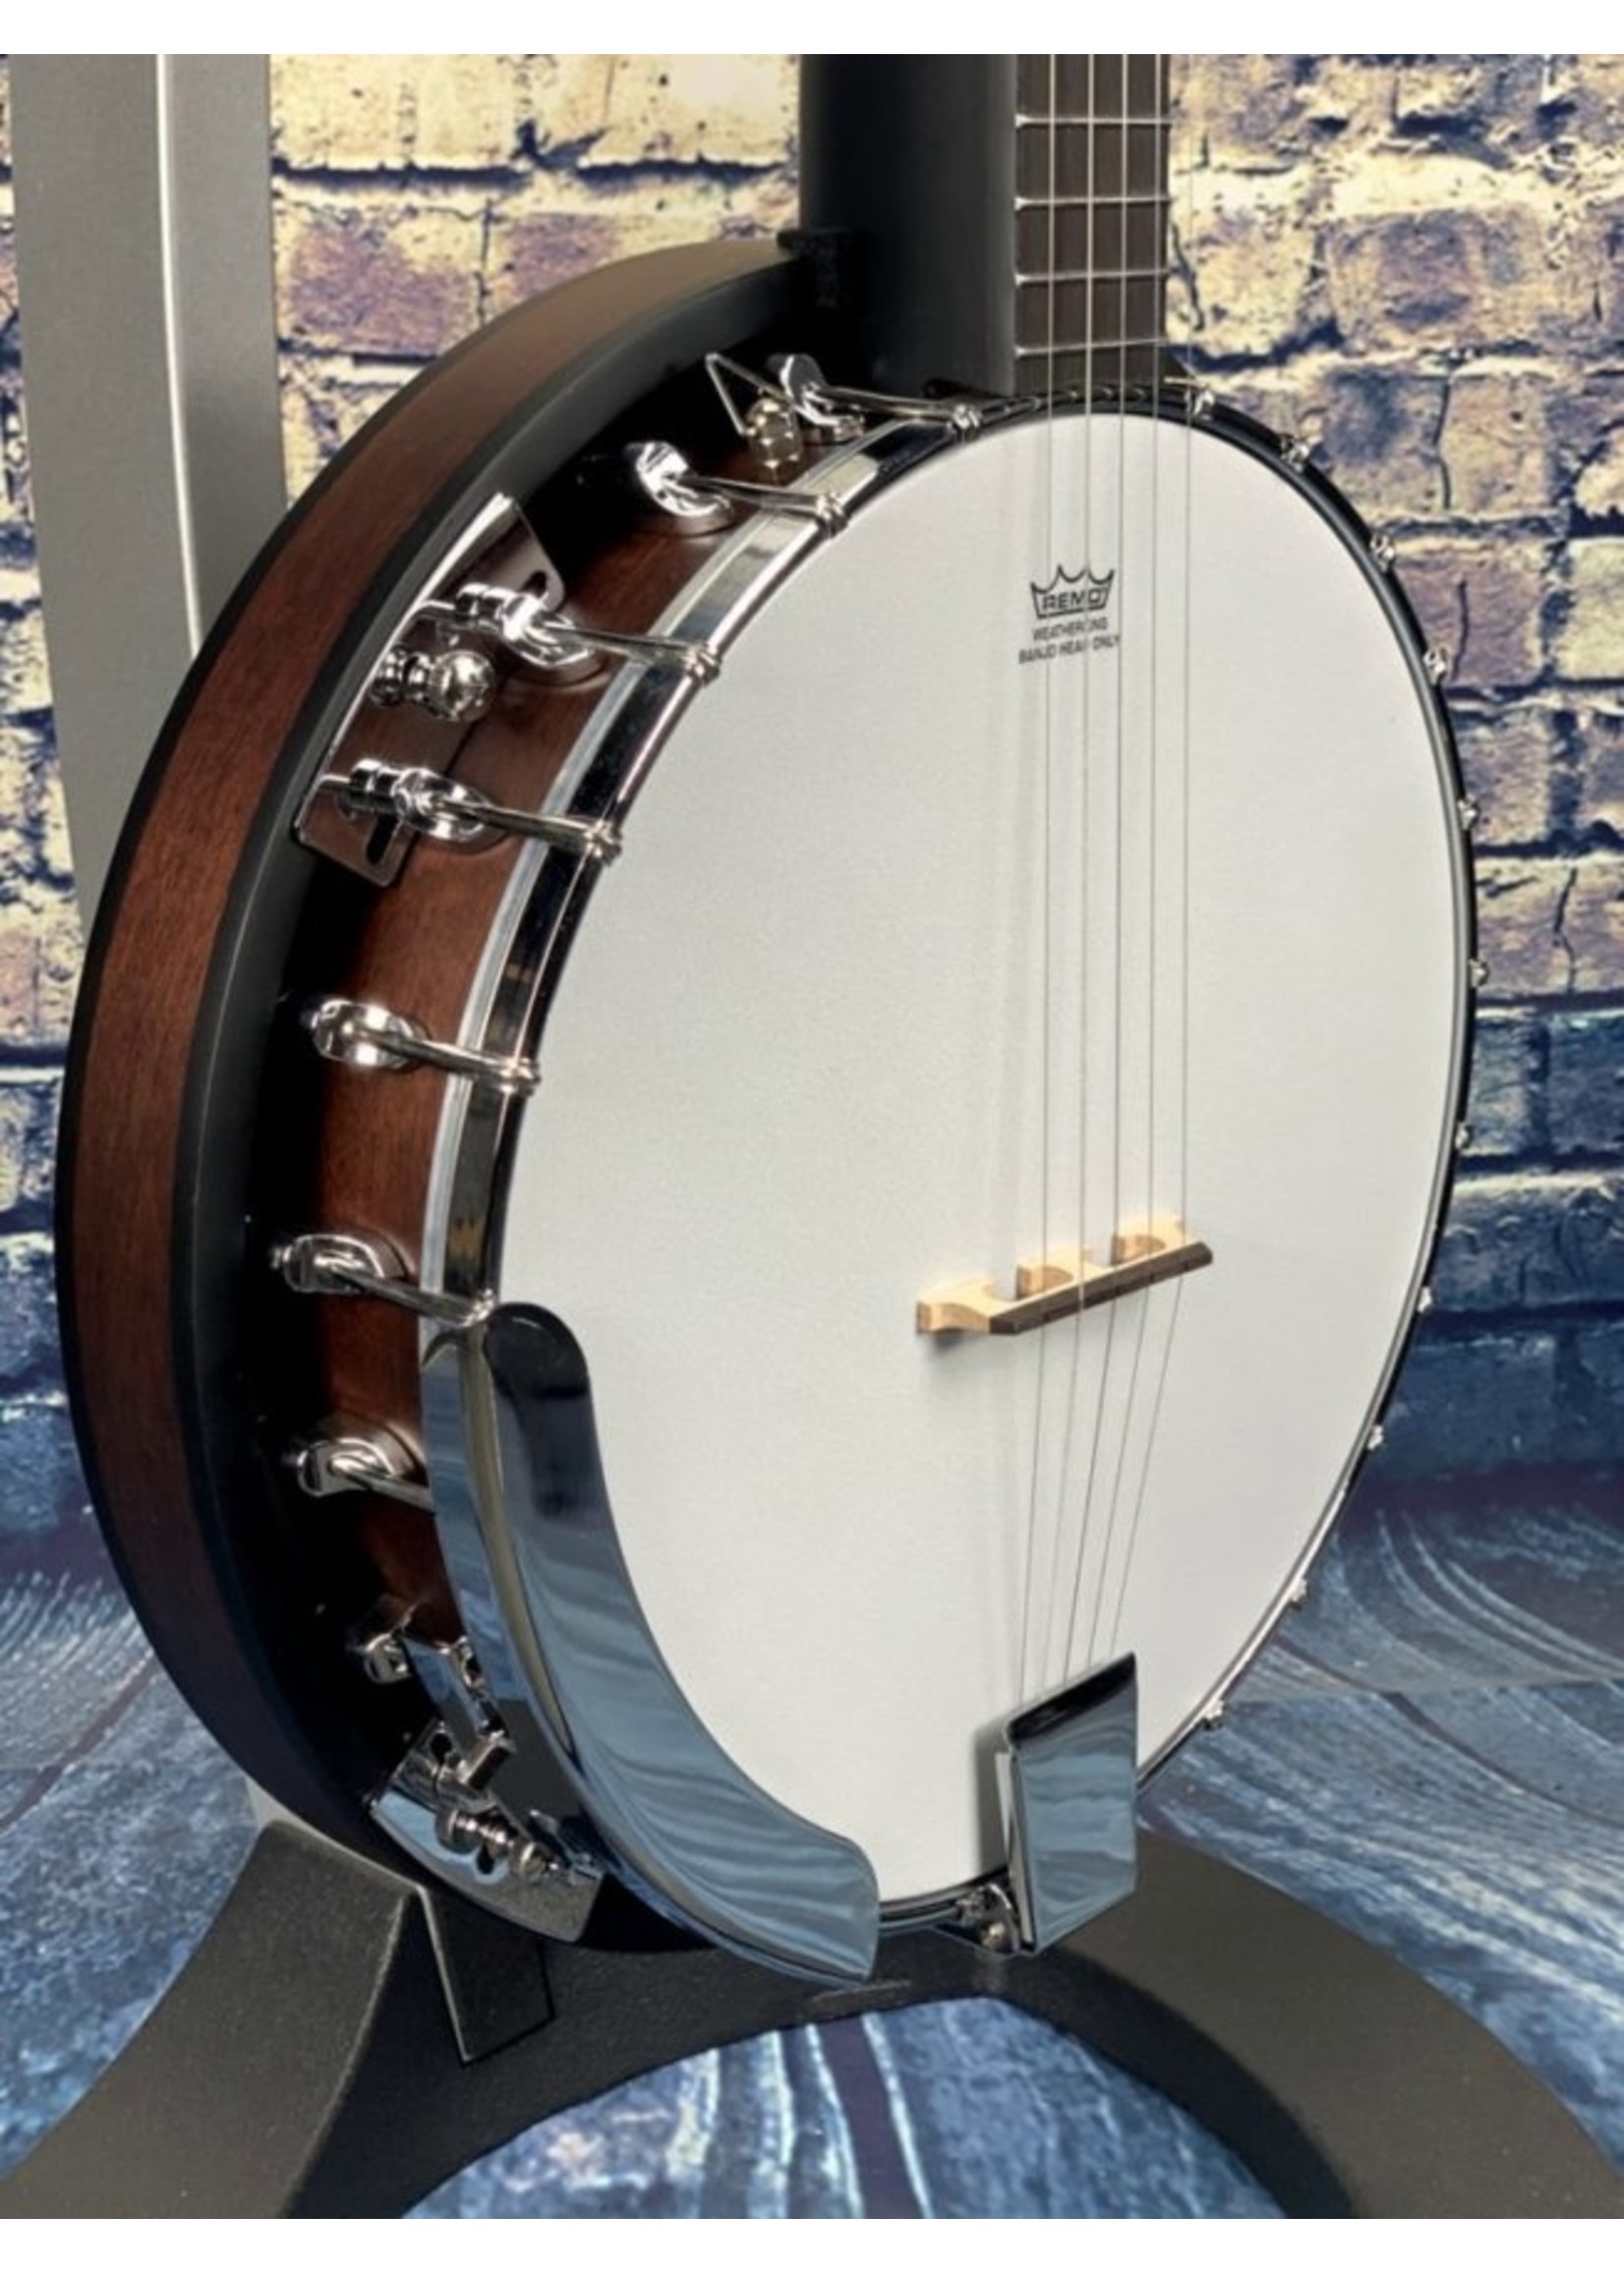 where to find the model number on a morgan monroe banjo